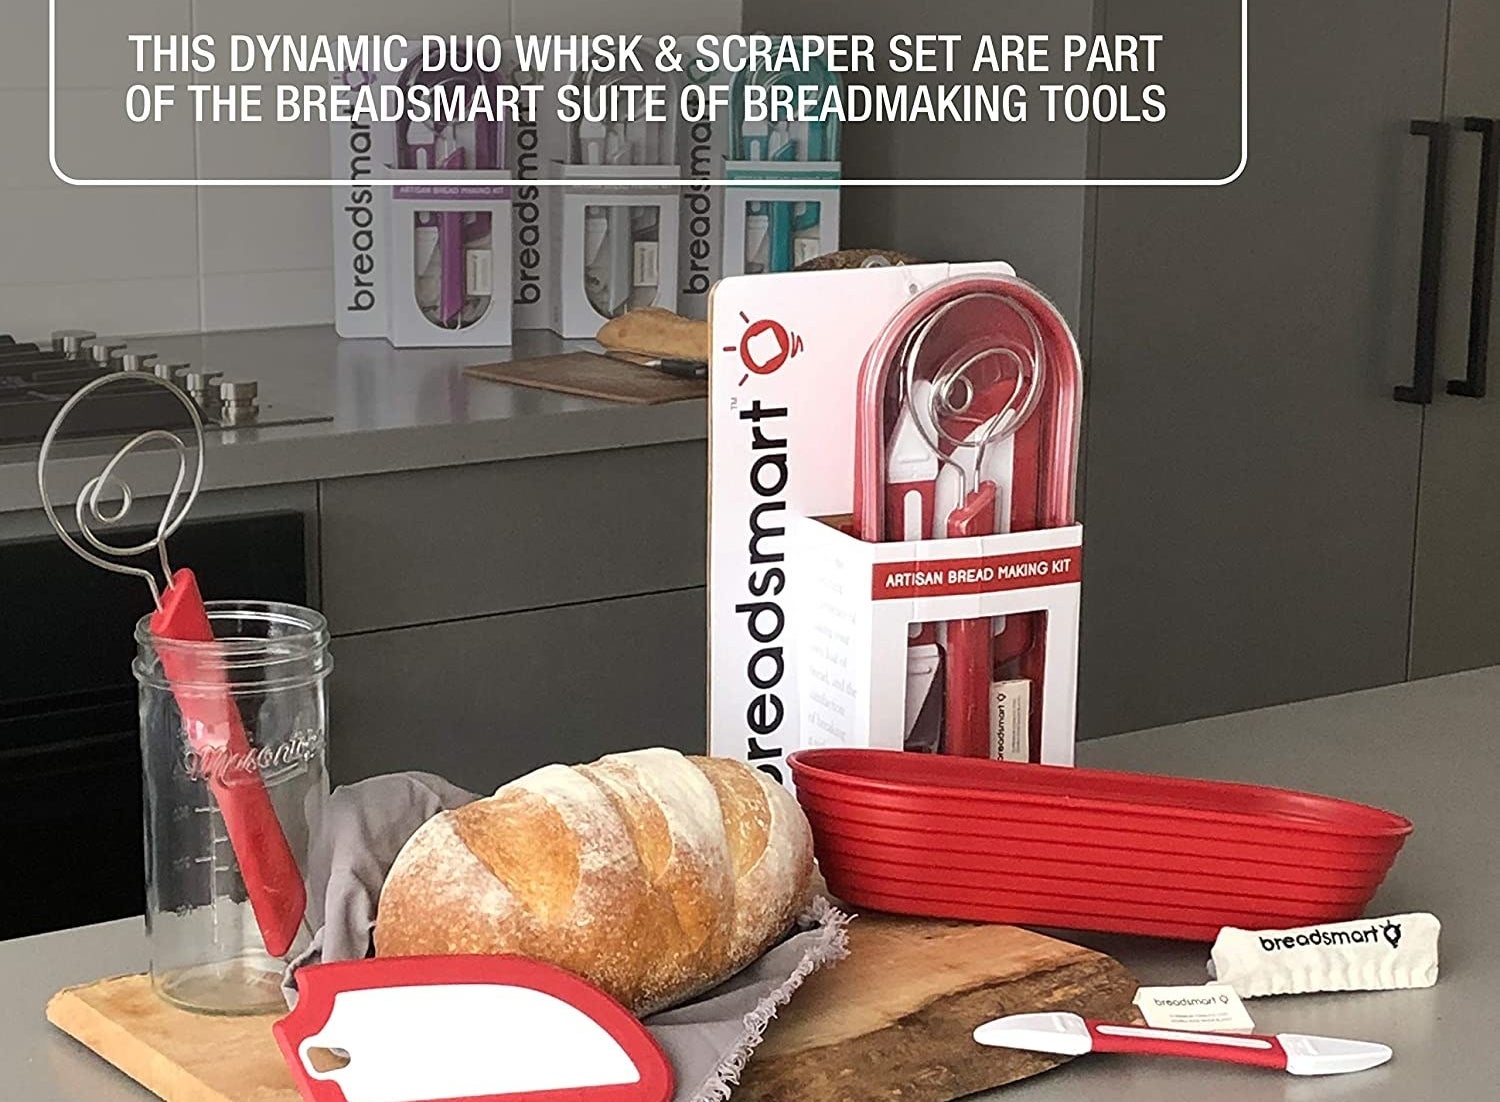 the complete bread-making kit with a mixer, separator, scorer and baking tray